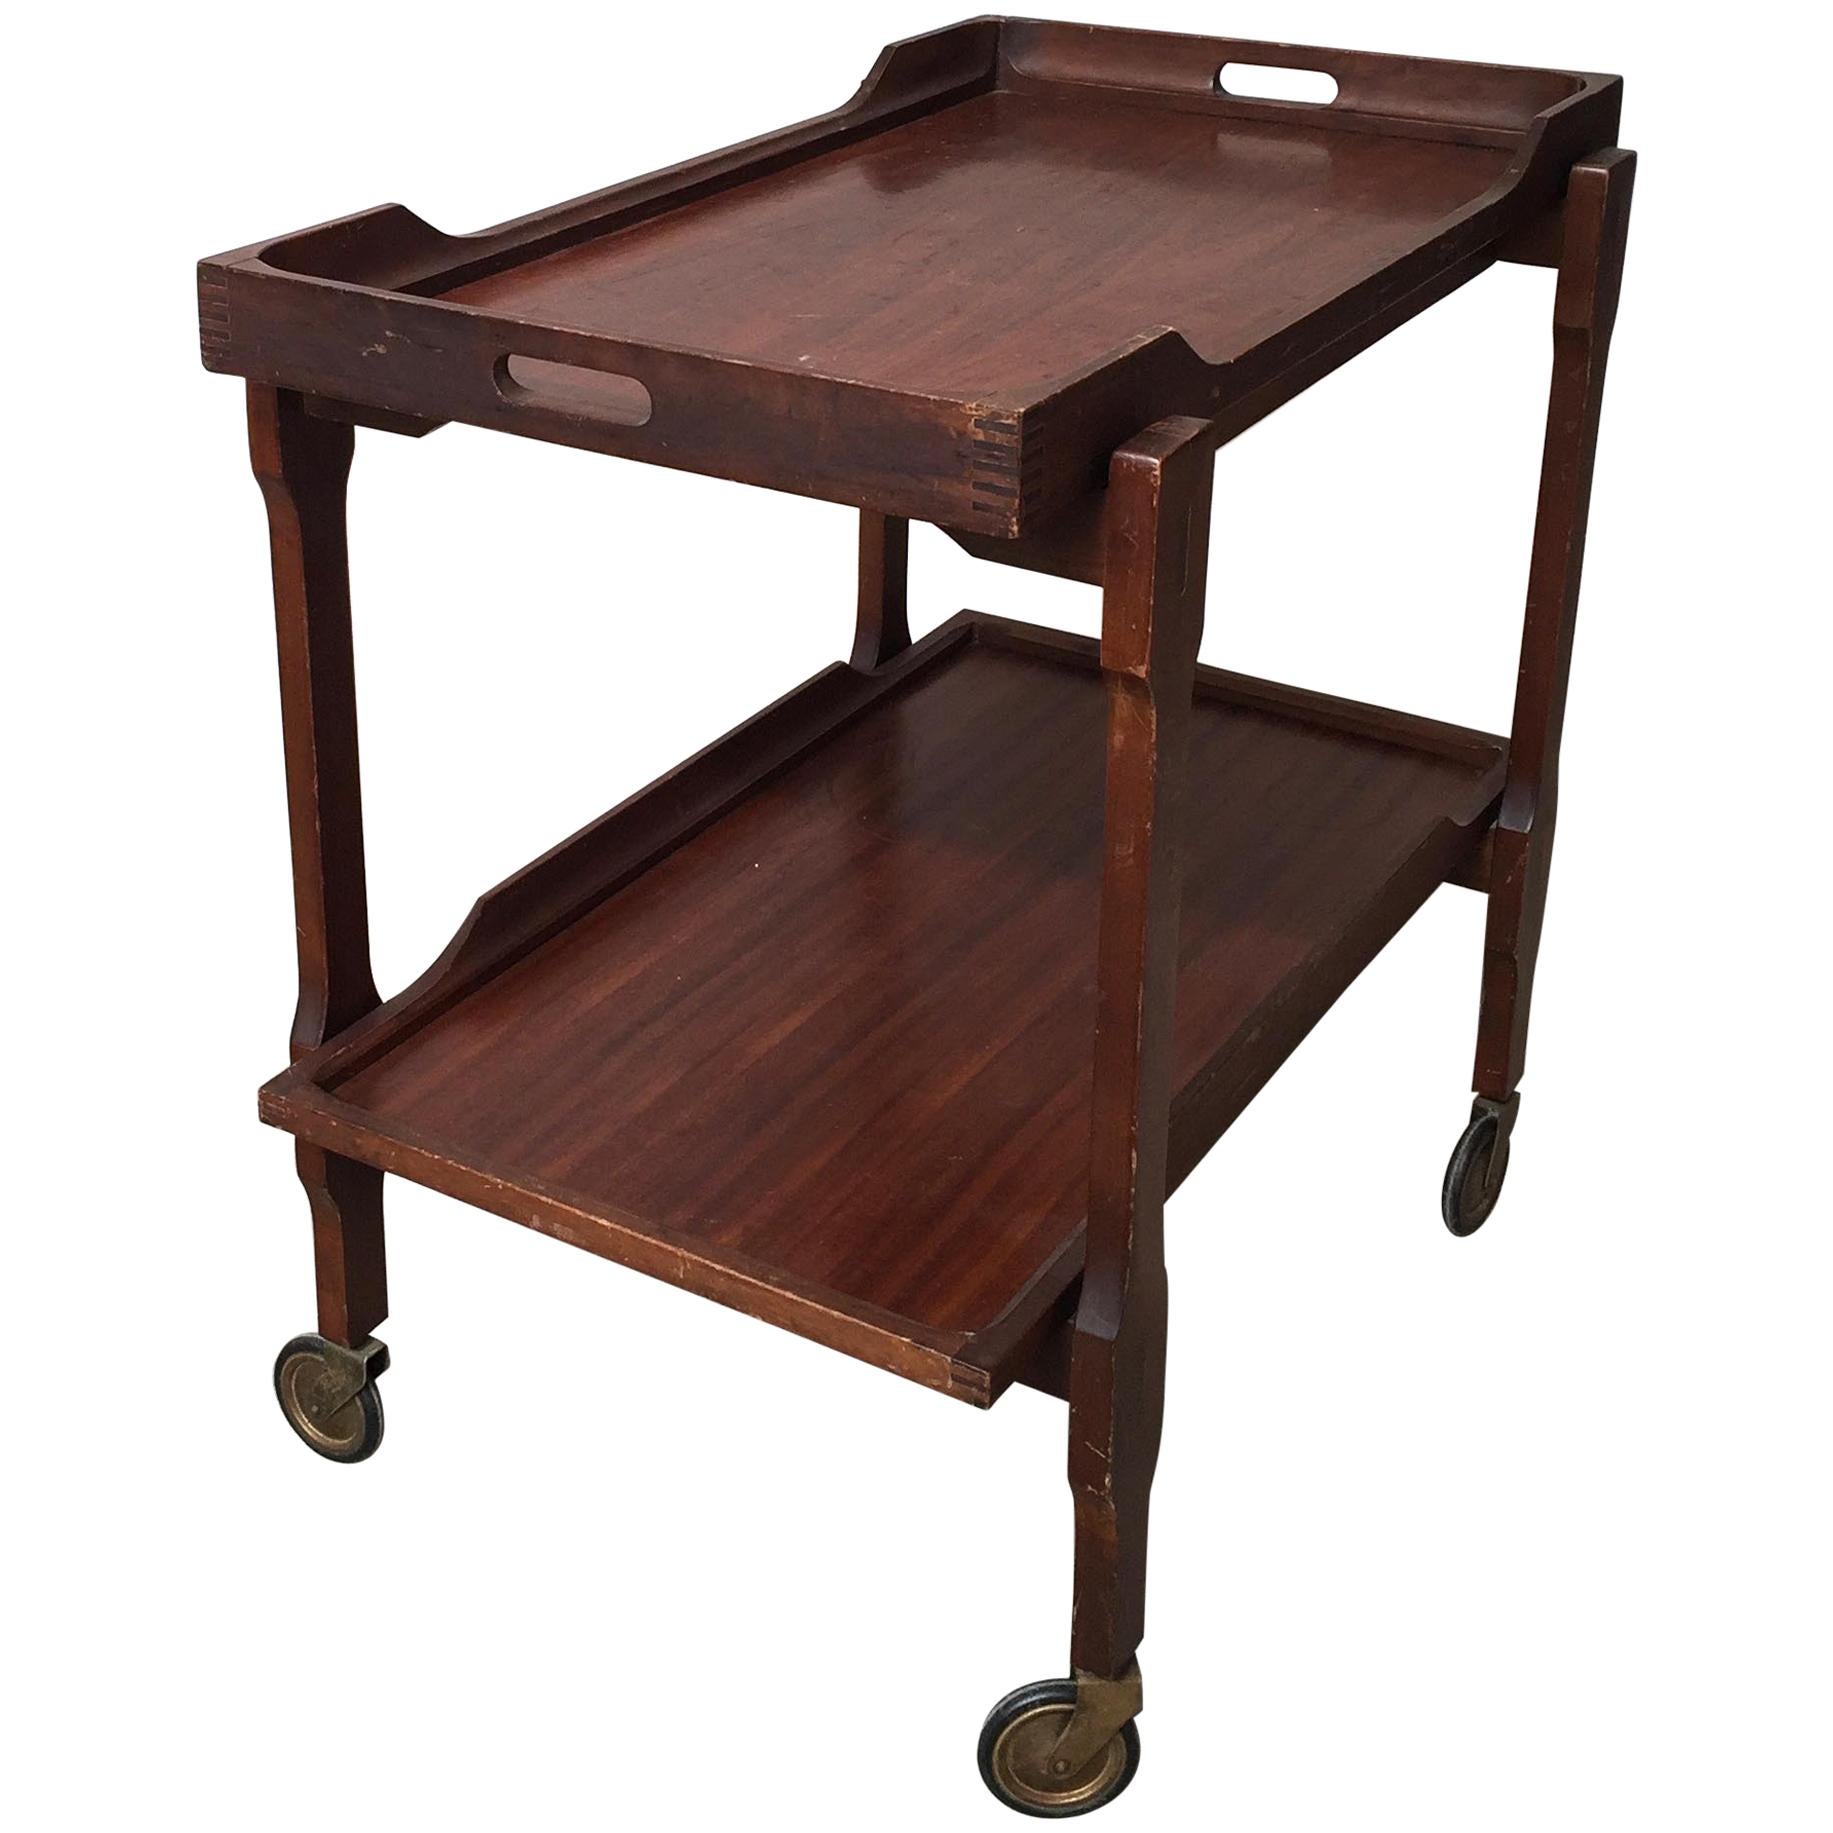 Scandinavian Bar Cart or Trolley in Mahogany Wood with Removable Tray, 1950s For Sale